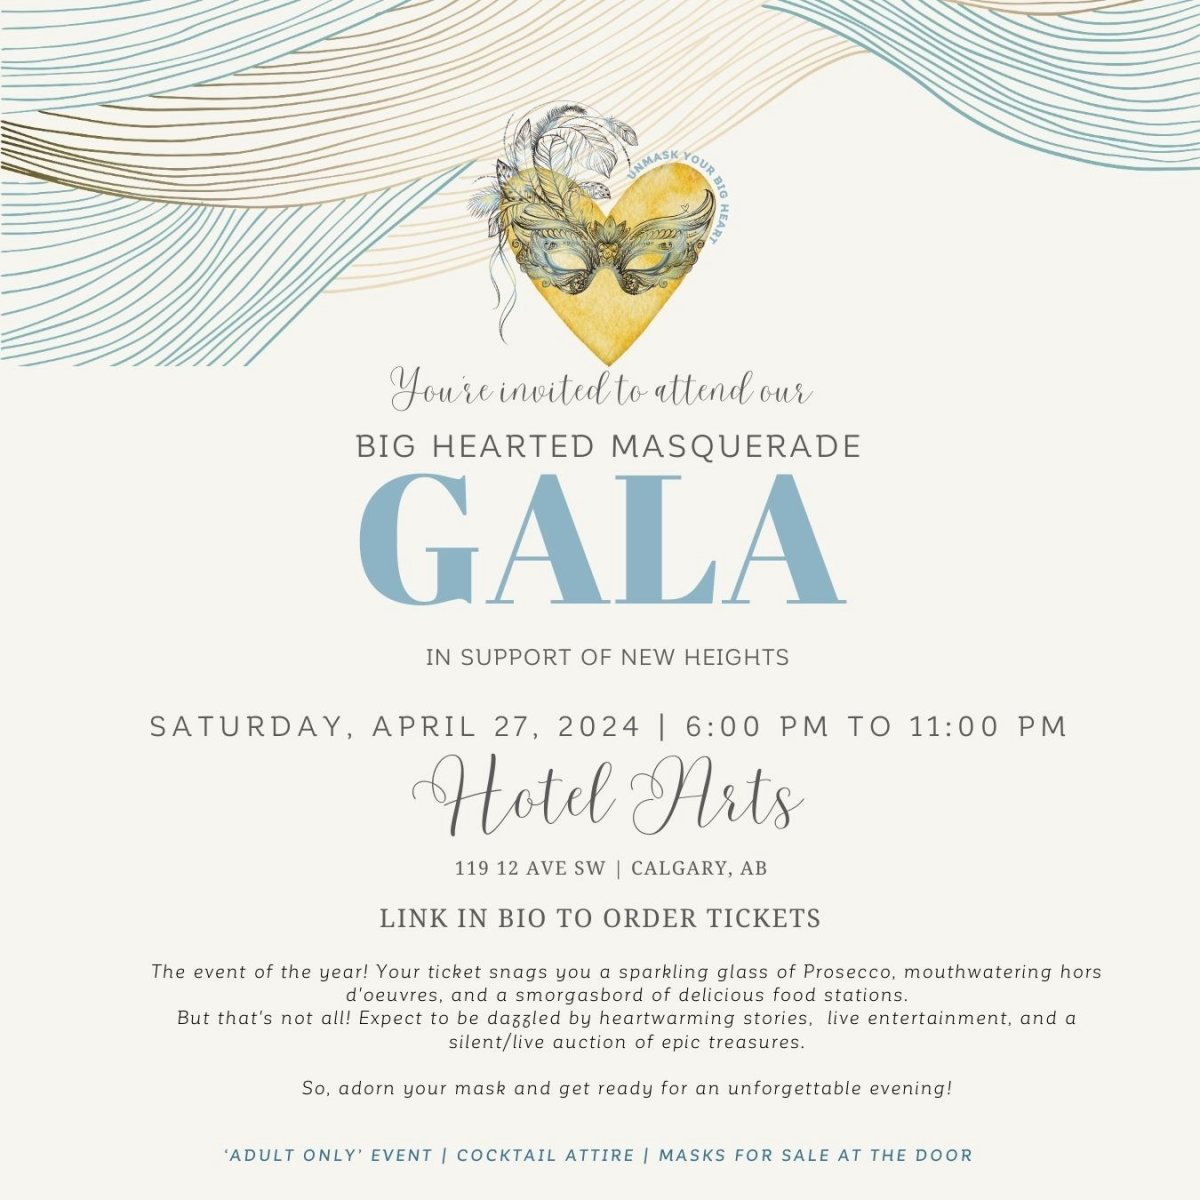 Big Hearted Masquerade Gala; supported by Global Calgary - image